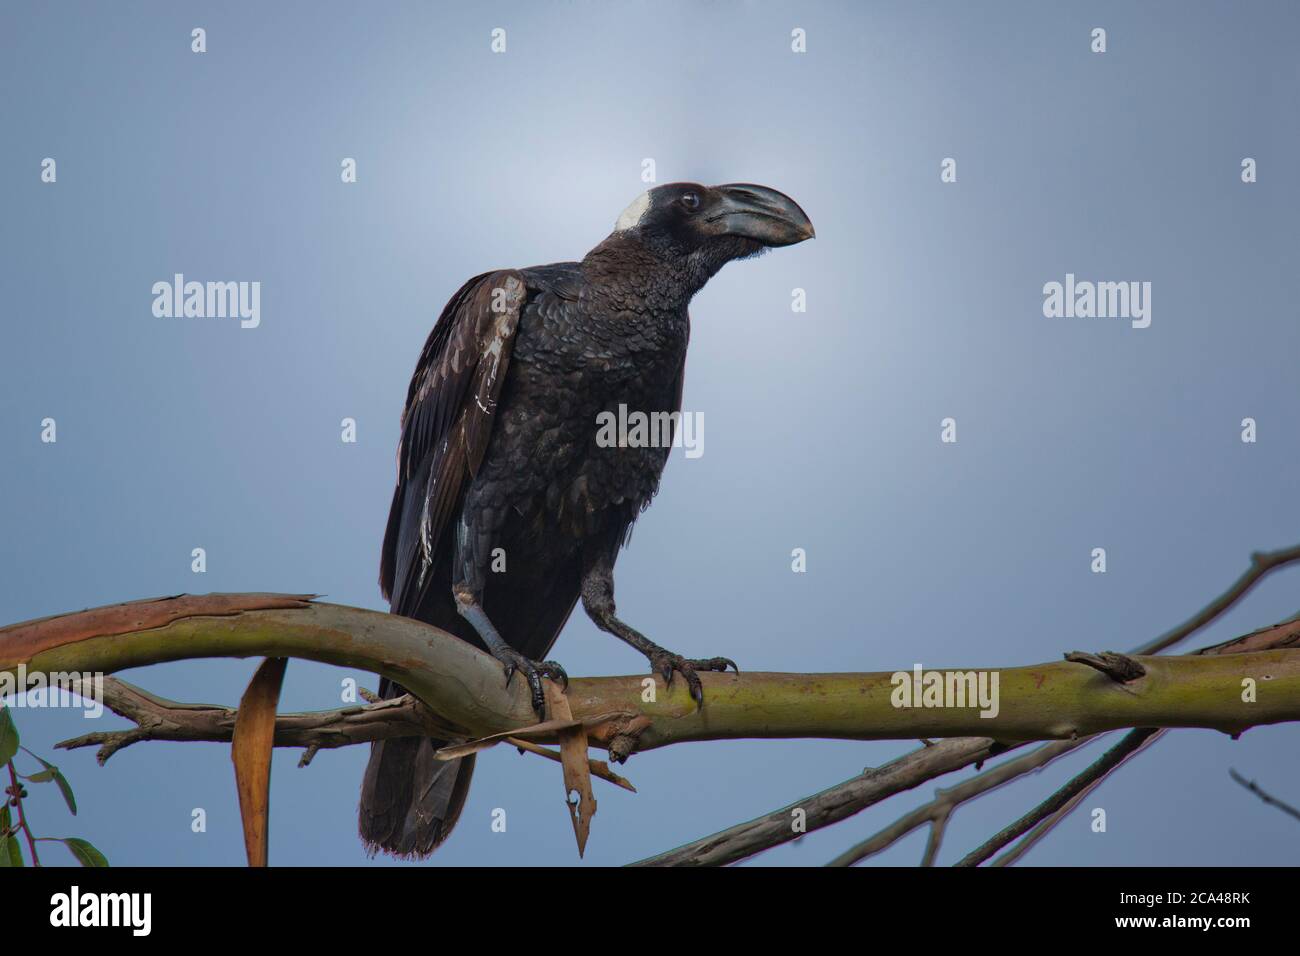 Thick-billed raven (Corvus crassirostris). This bird is the largest member of the raven family and is also the largest perching bird (Passeriformes) r Stock Photo